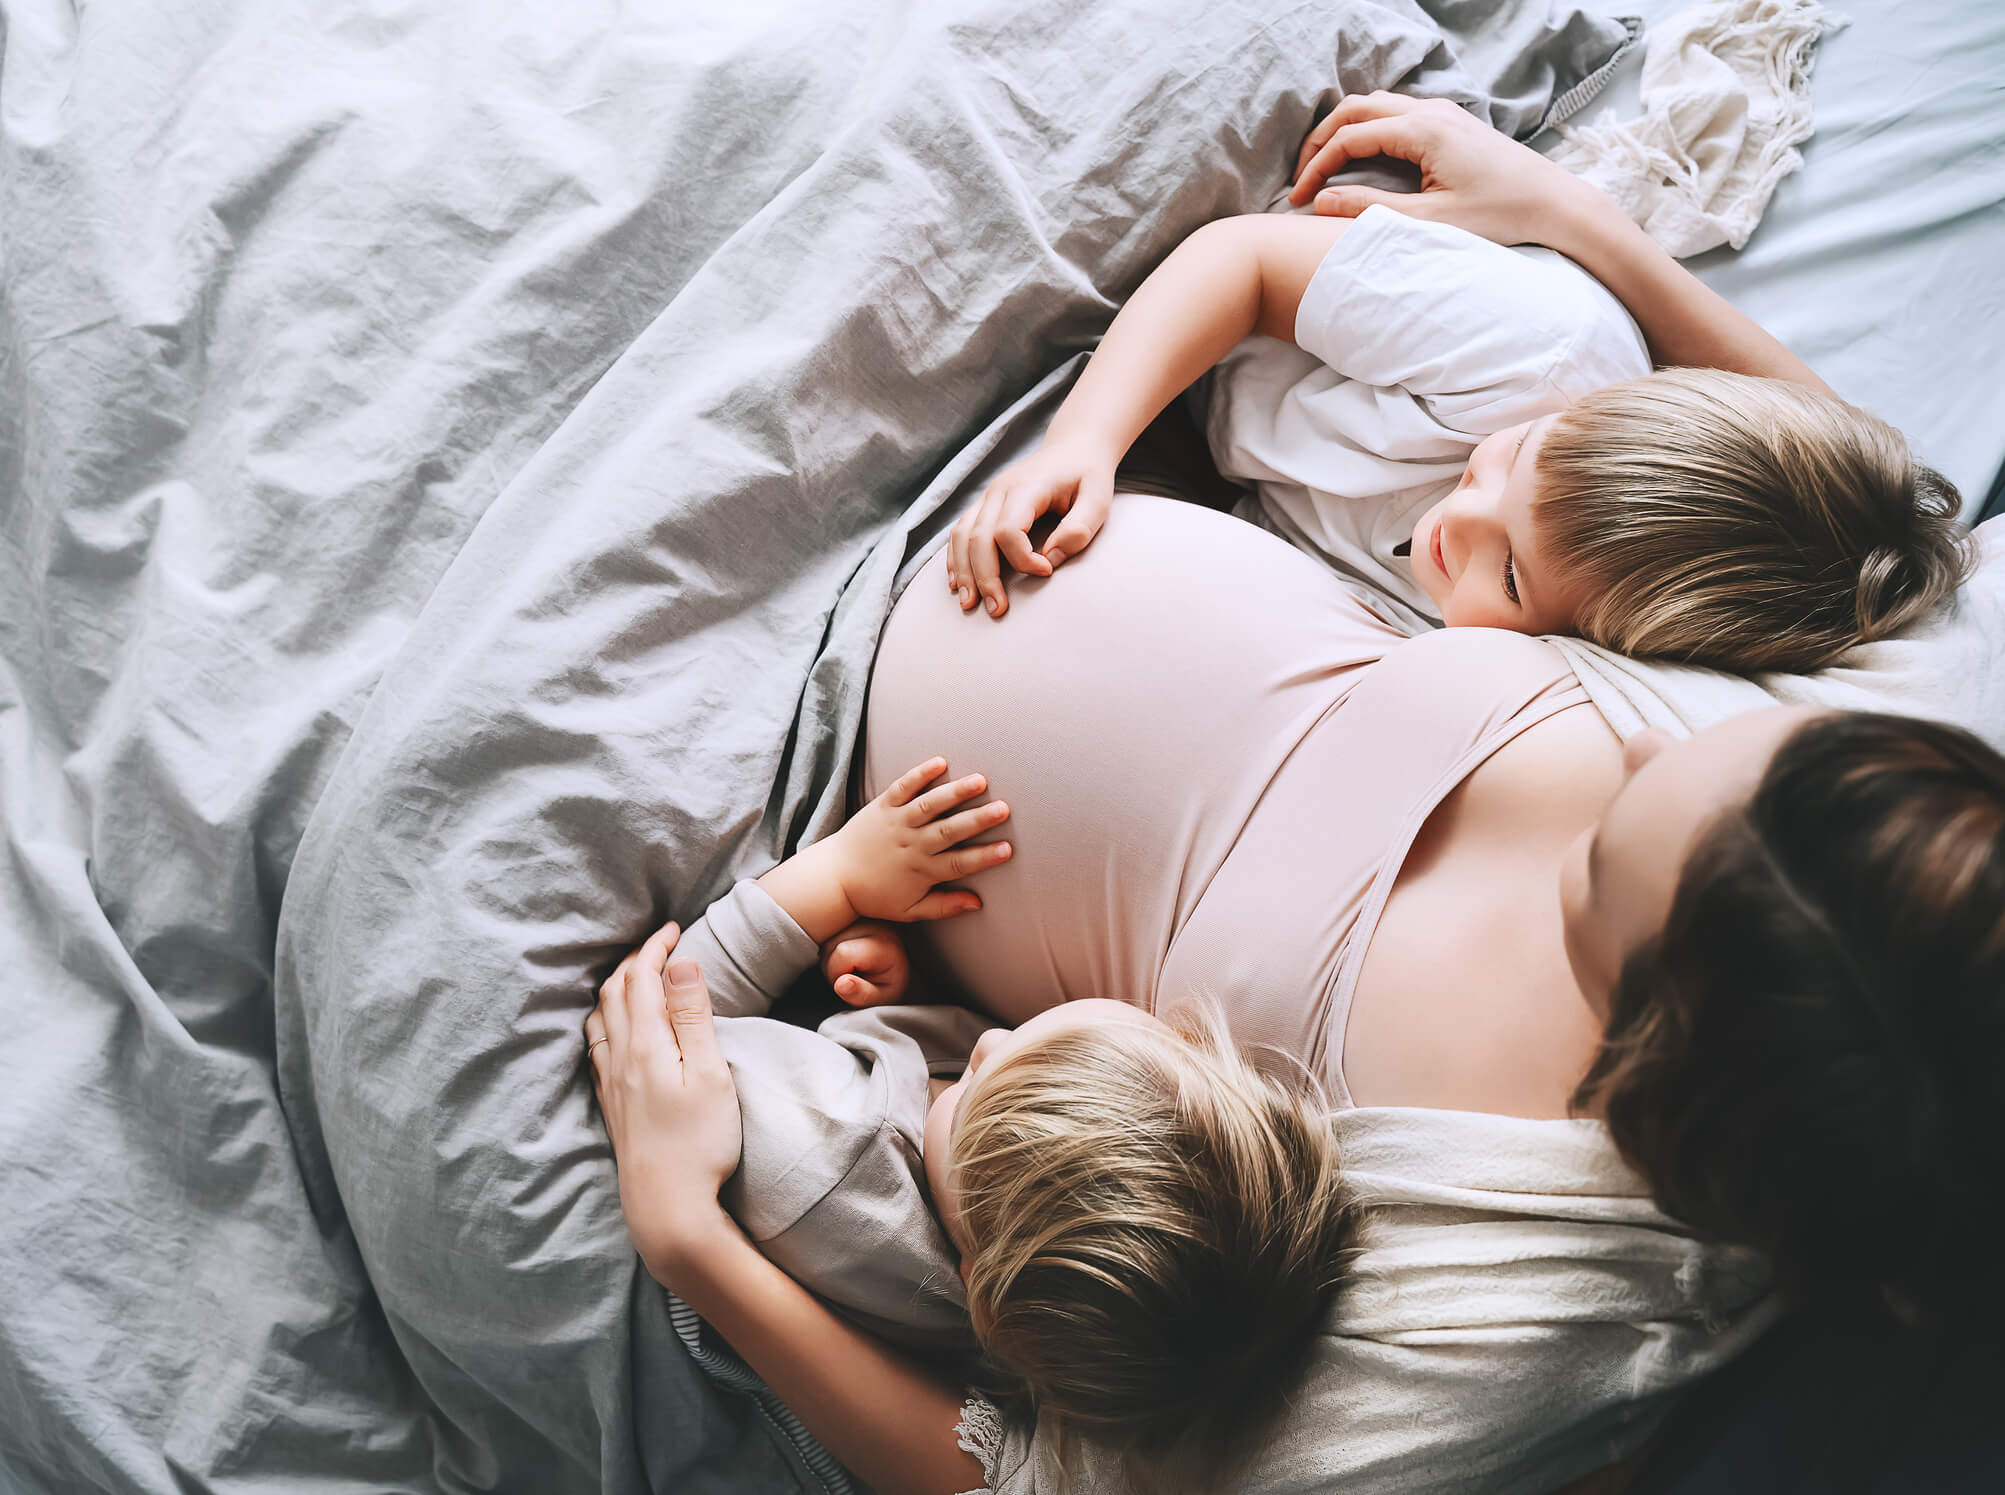 Pregnant woman with her children relaxing in bed. Loving mother and toddlers together at home.